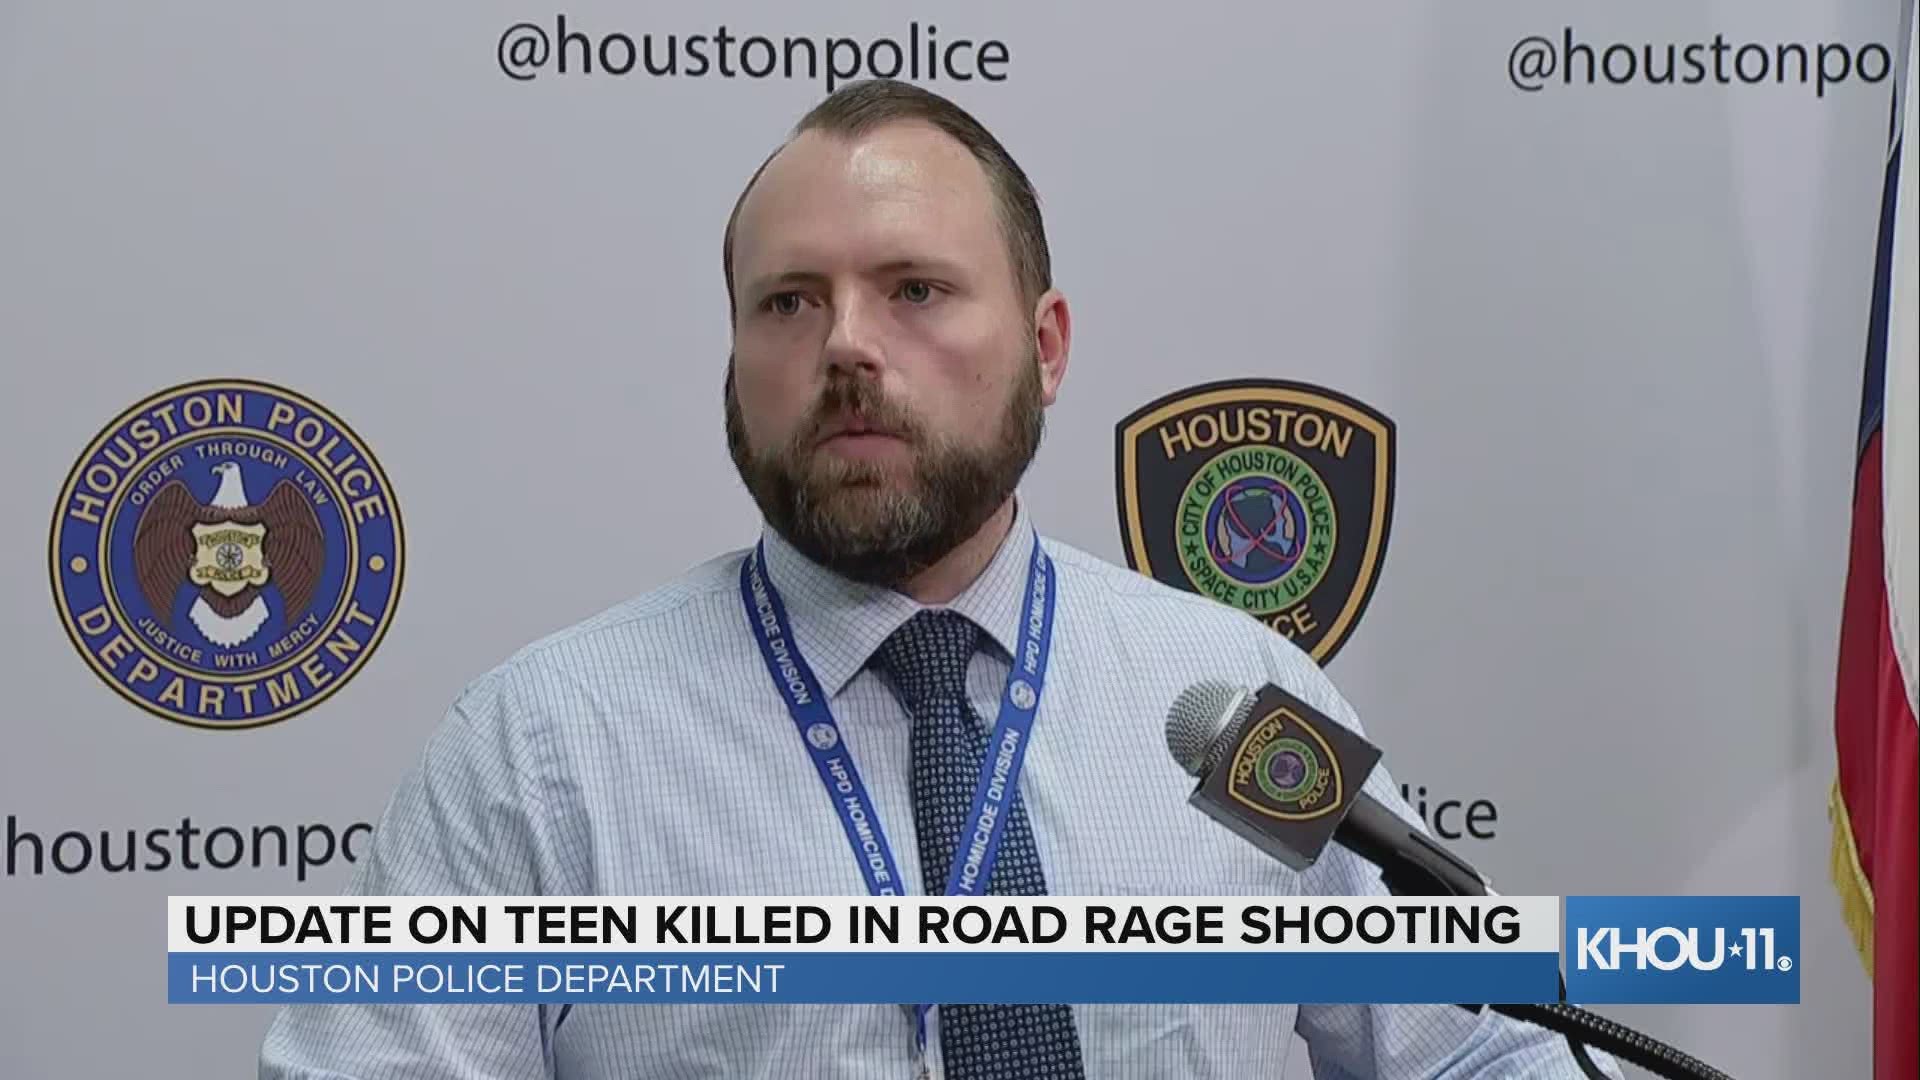 The suspect accused of shooting and killing a teen during a road rage incident after an Astros game is still on the run. Houston police said they are in need of tips